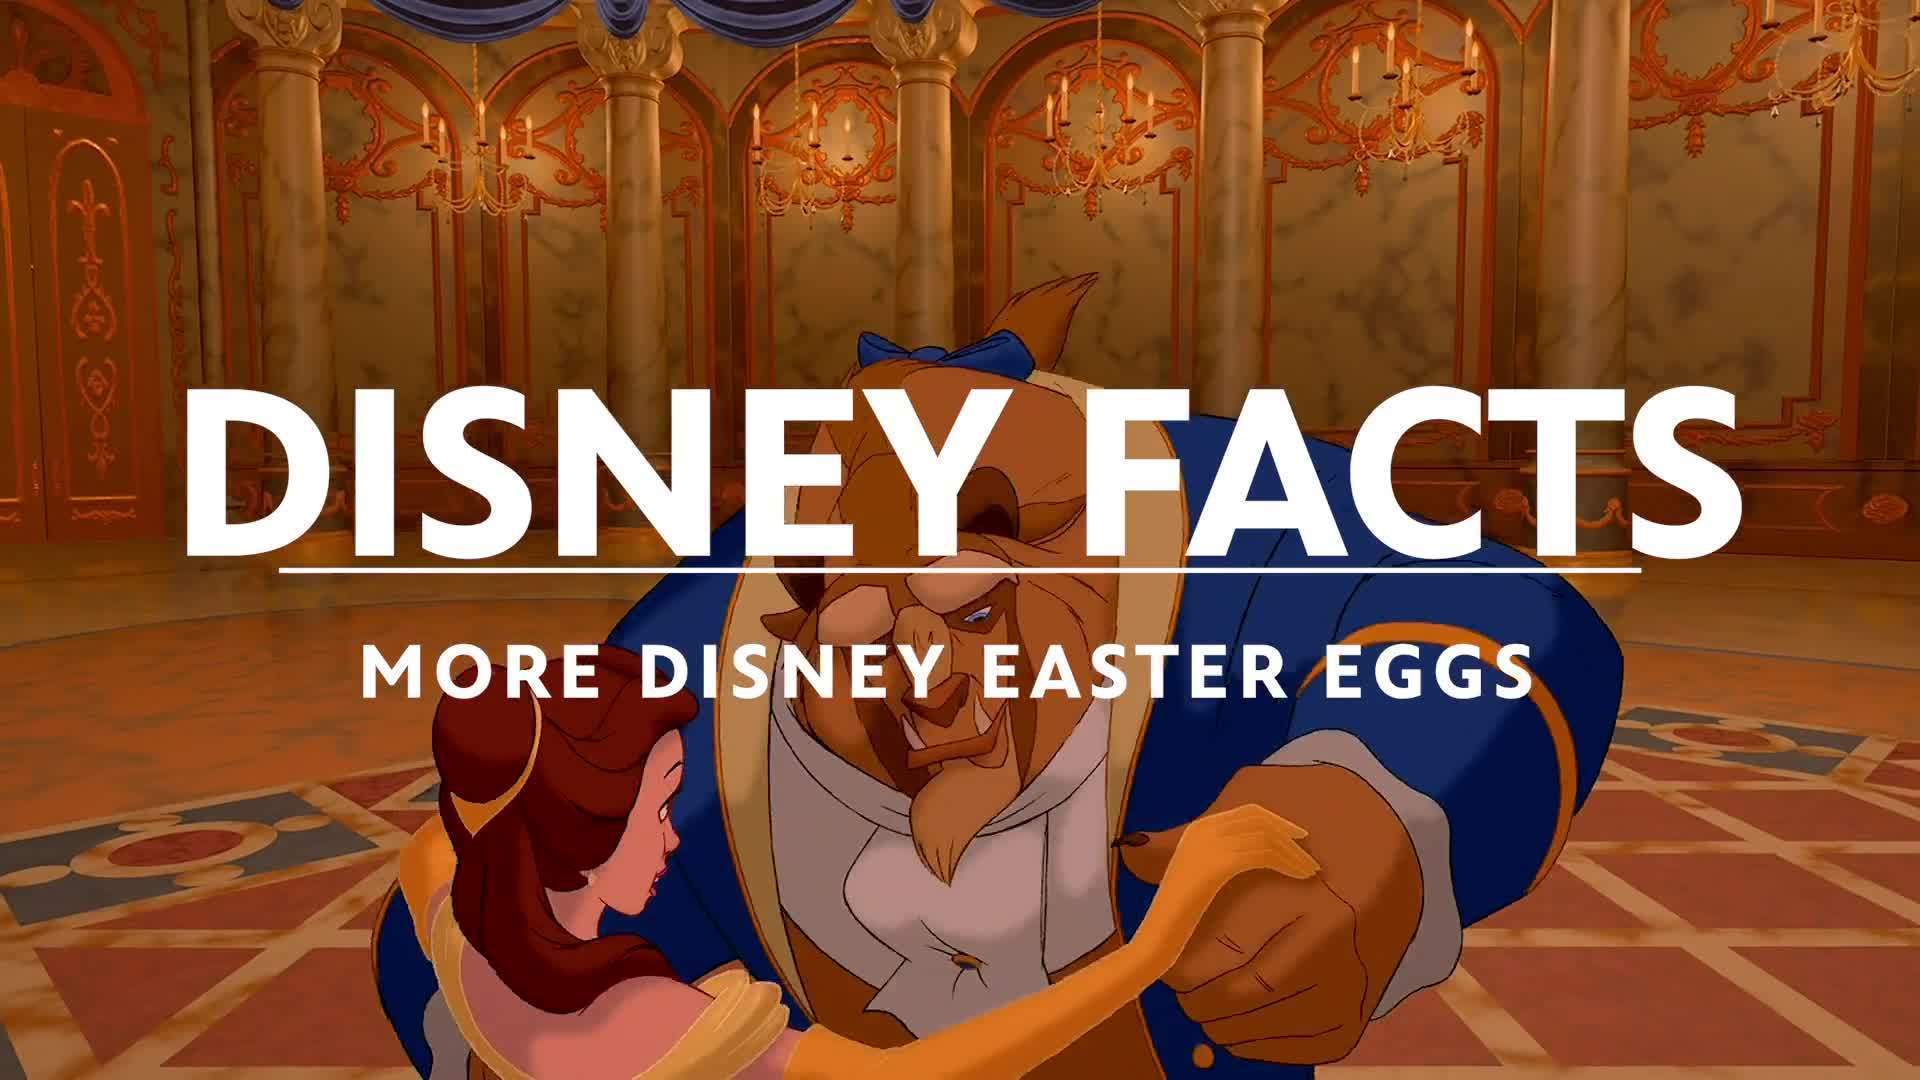 More Disney Easter Eggs | Disney Facts by Disney